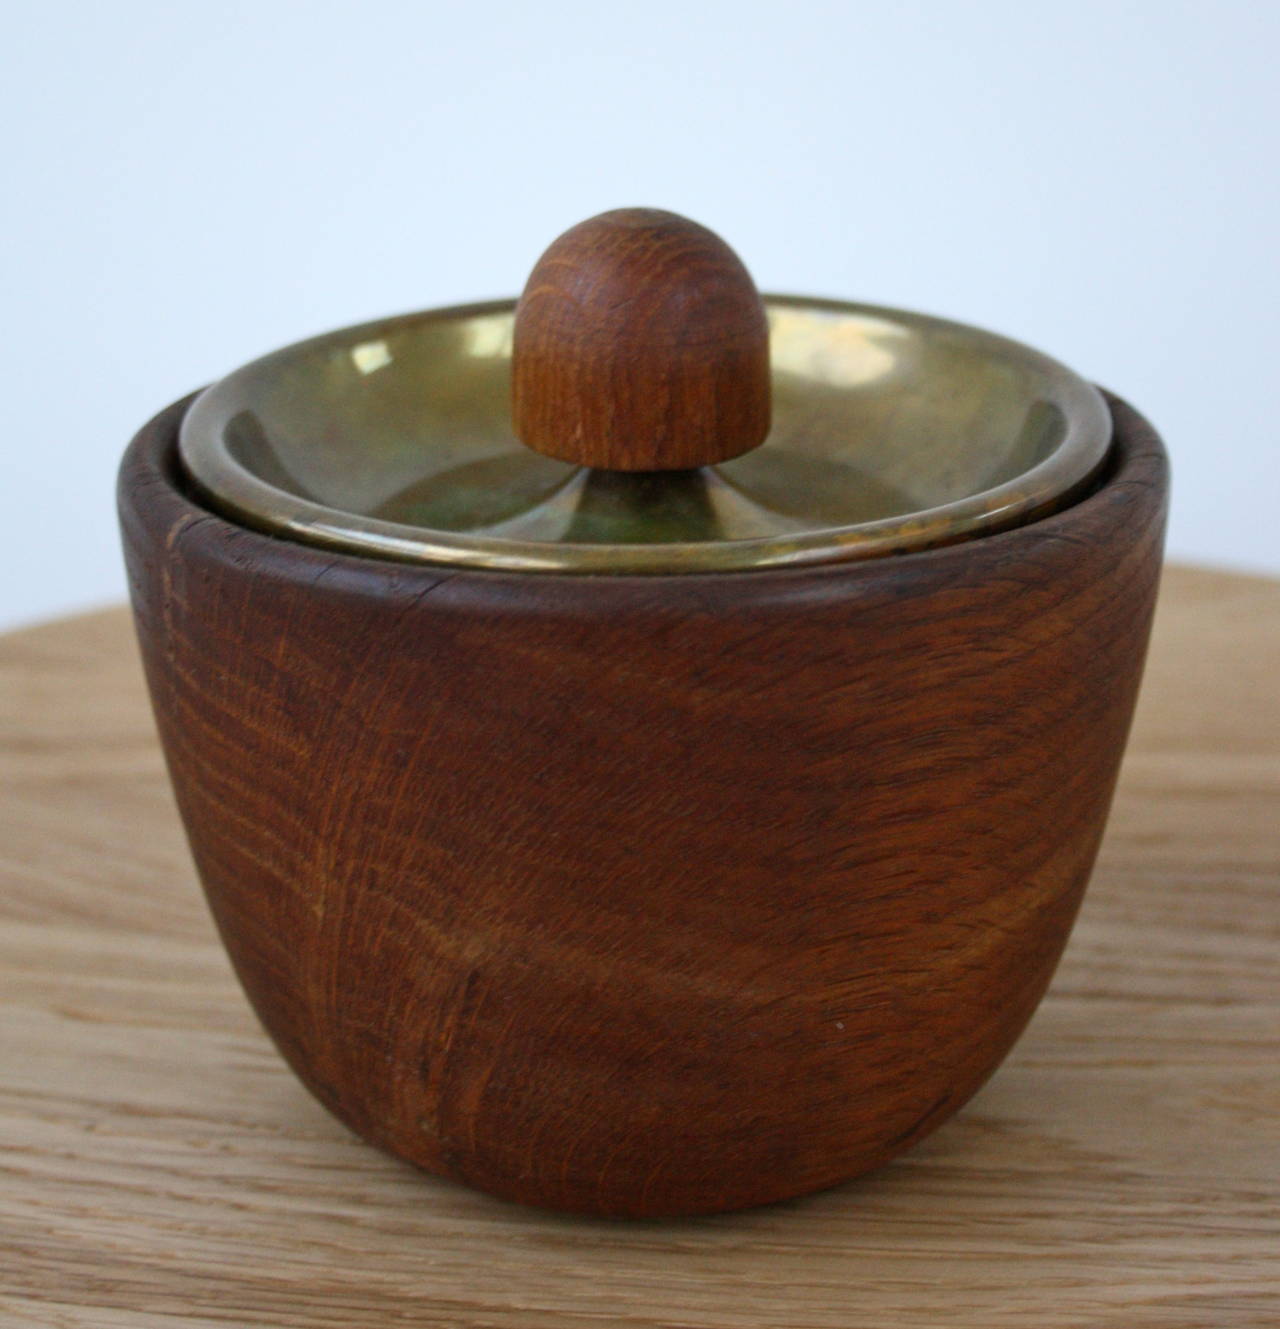 Beautifully turned walnut bowl with an accompanying brass lid with a leather seal. Used for tobacco, hints of the rich smell still are present. With exquisite leather work and hand working of brass, this Viennese 1950s pot would make a wonderful